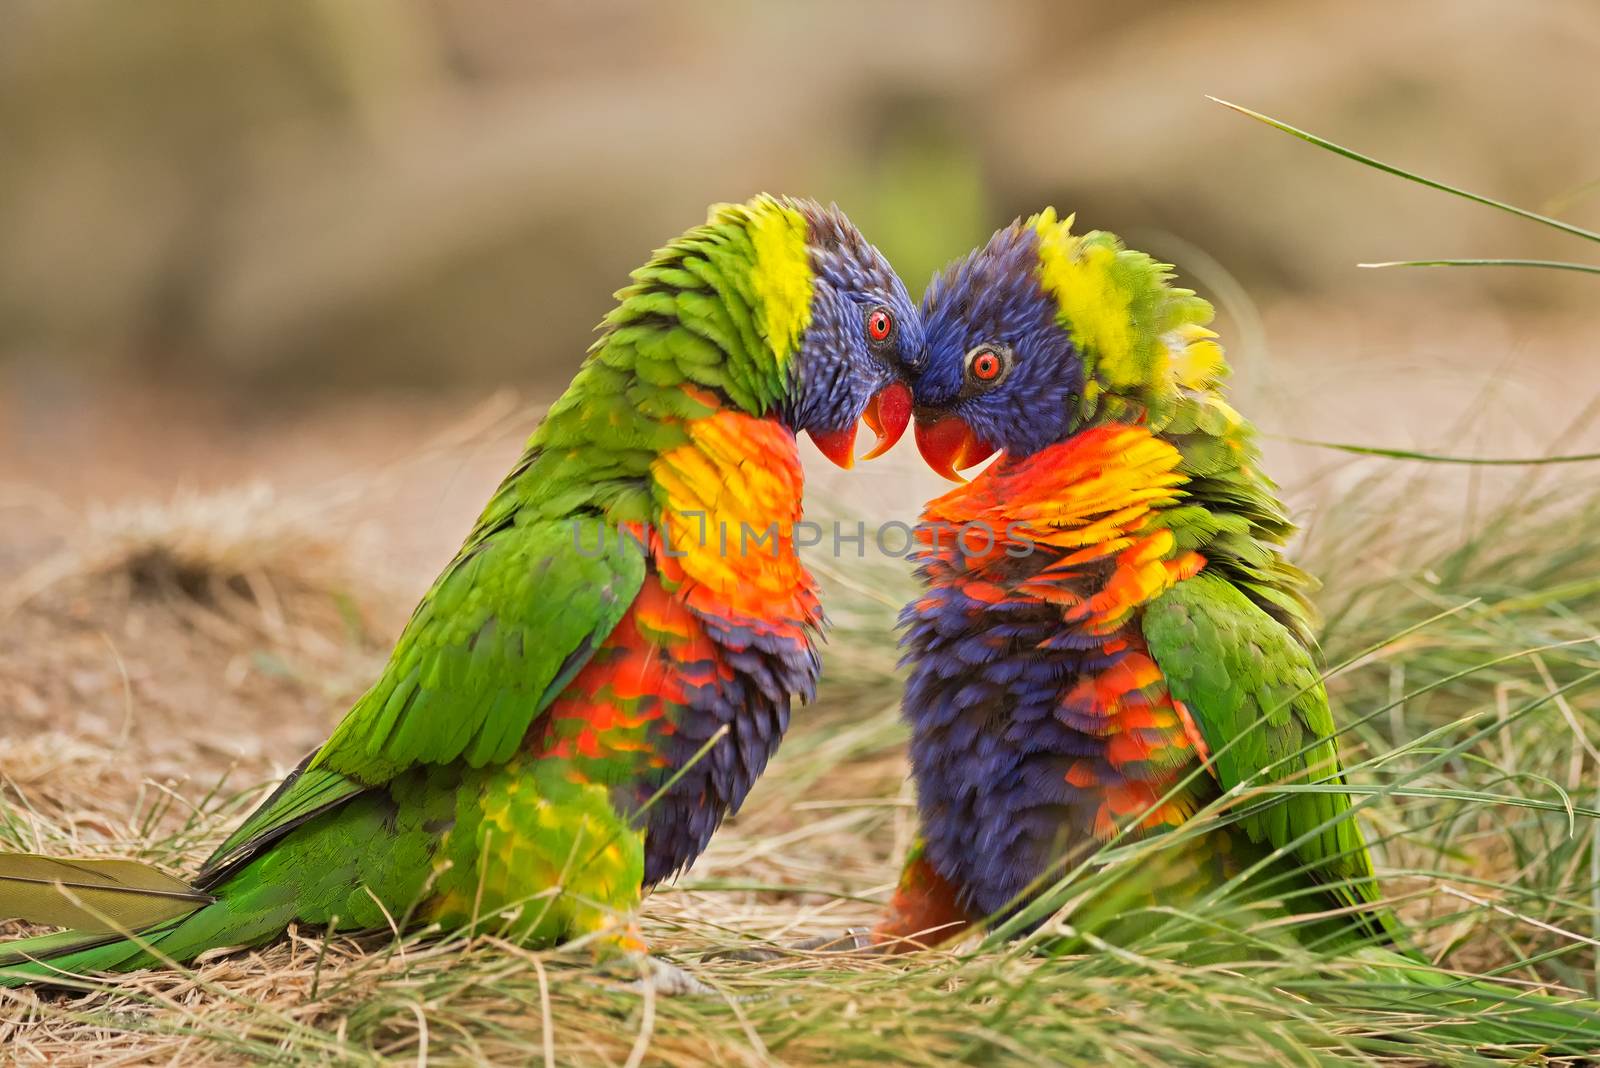 Two rainbow lorikeets also known as Trichoglossus haematodus Moluccanus fighting.